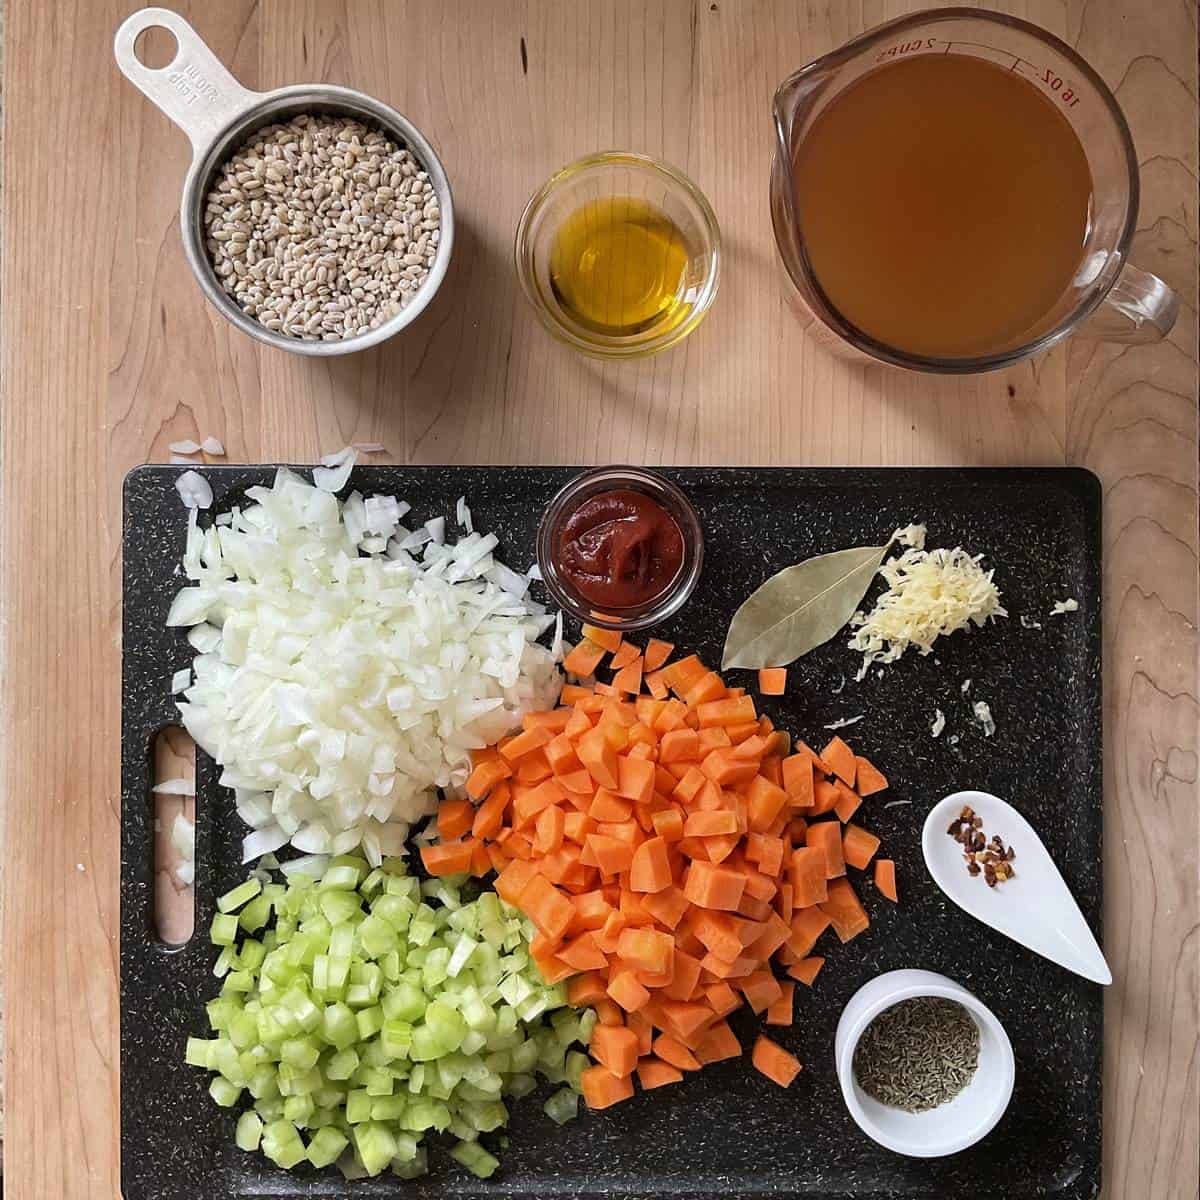 Chopped vegetables and ingredients to make a homemade soup on a cutting board.